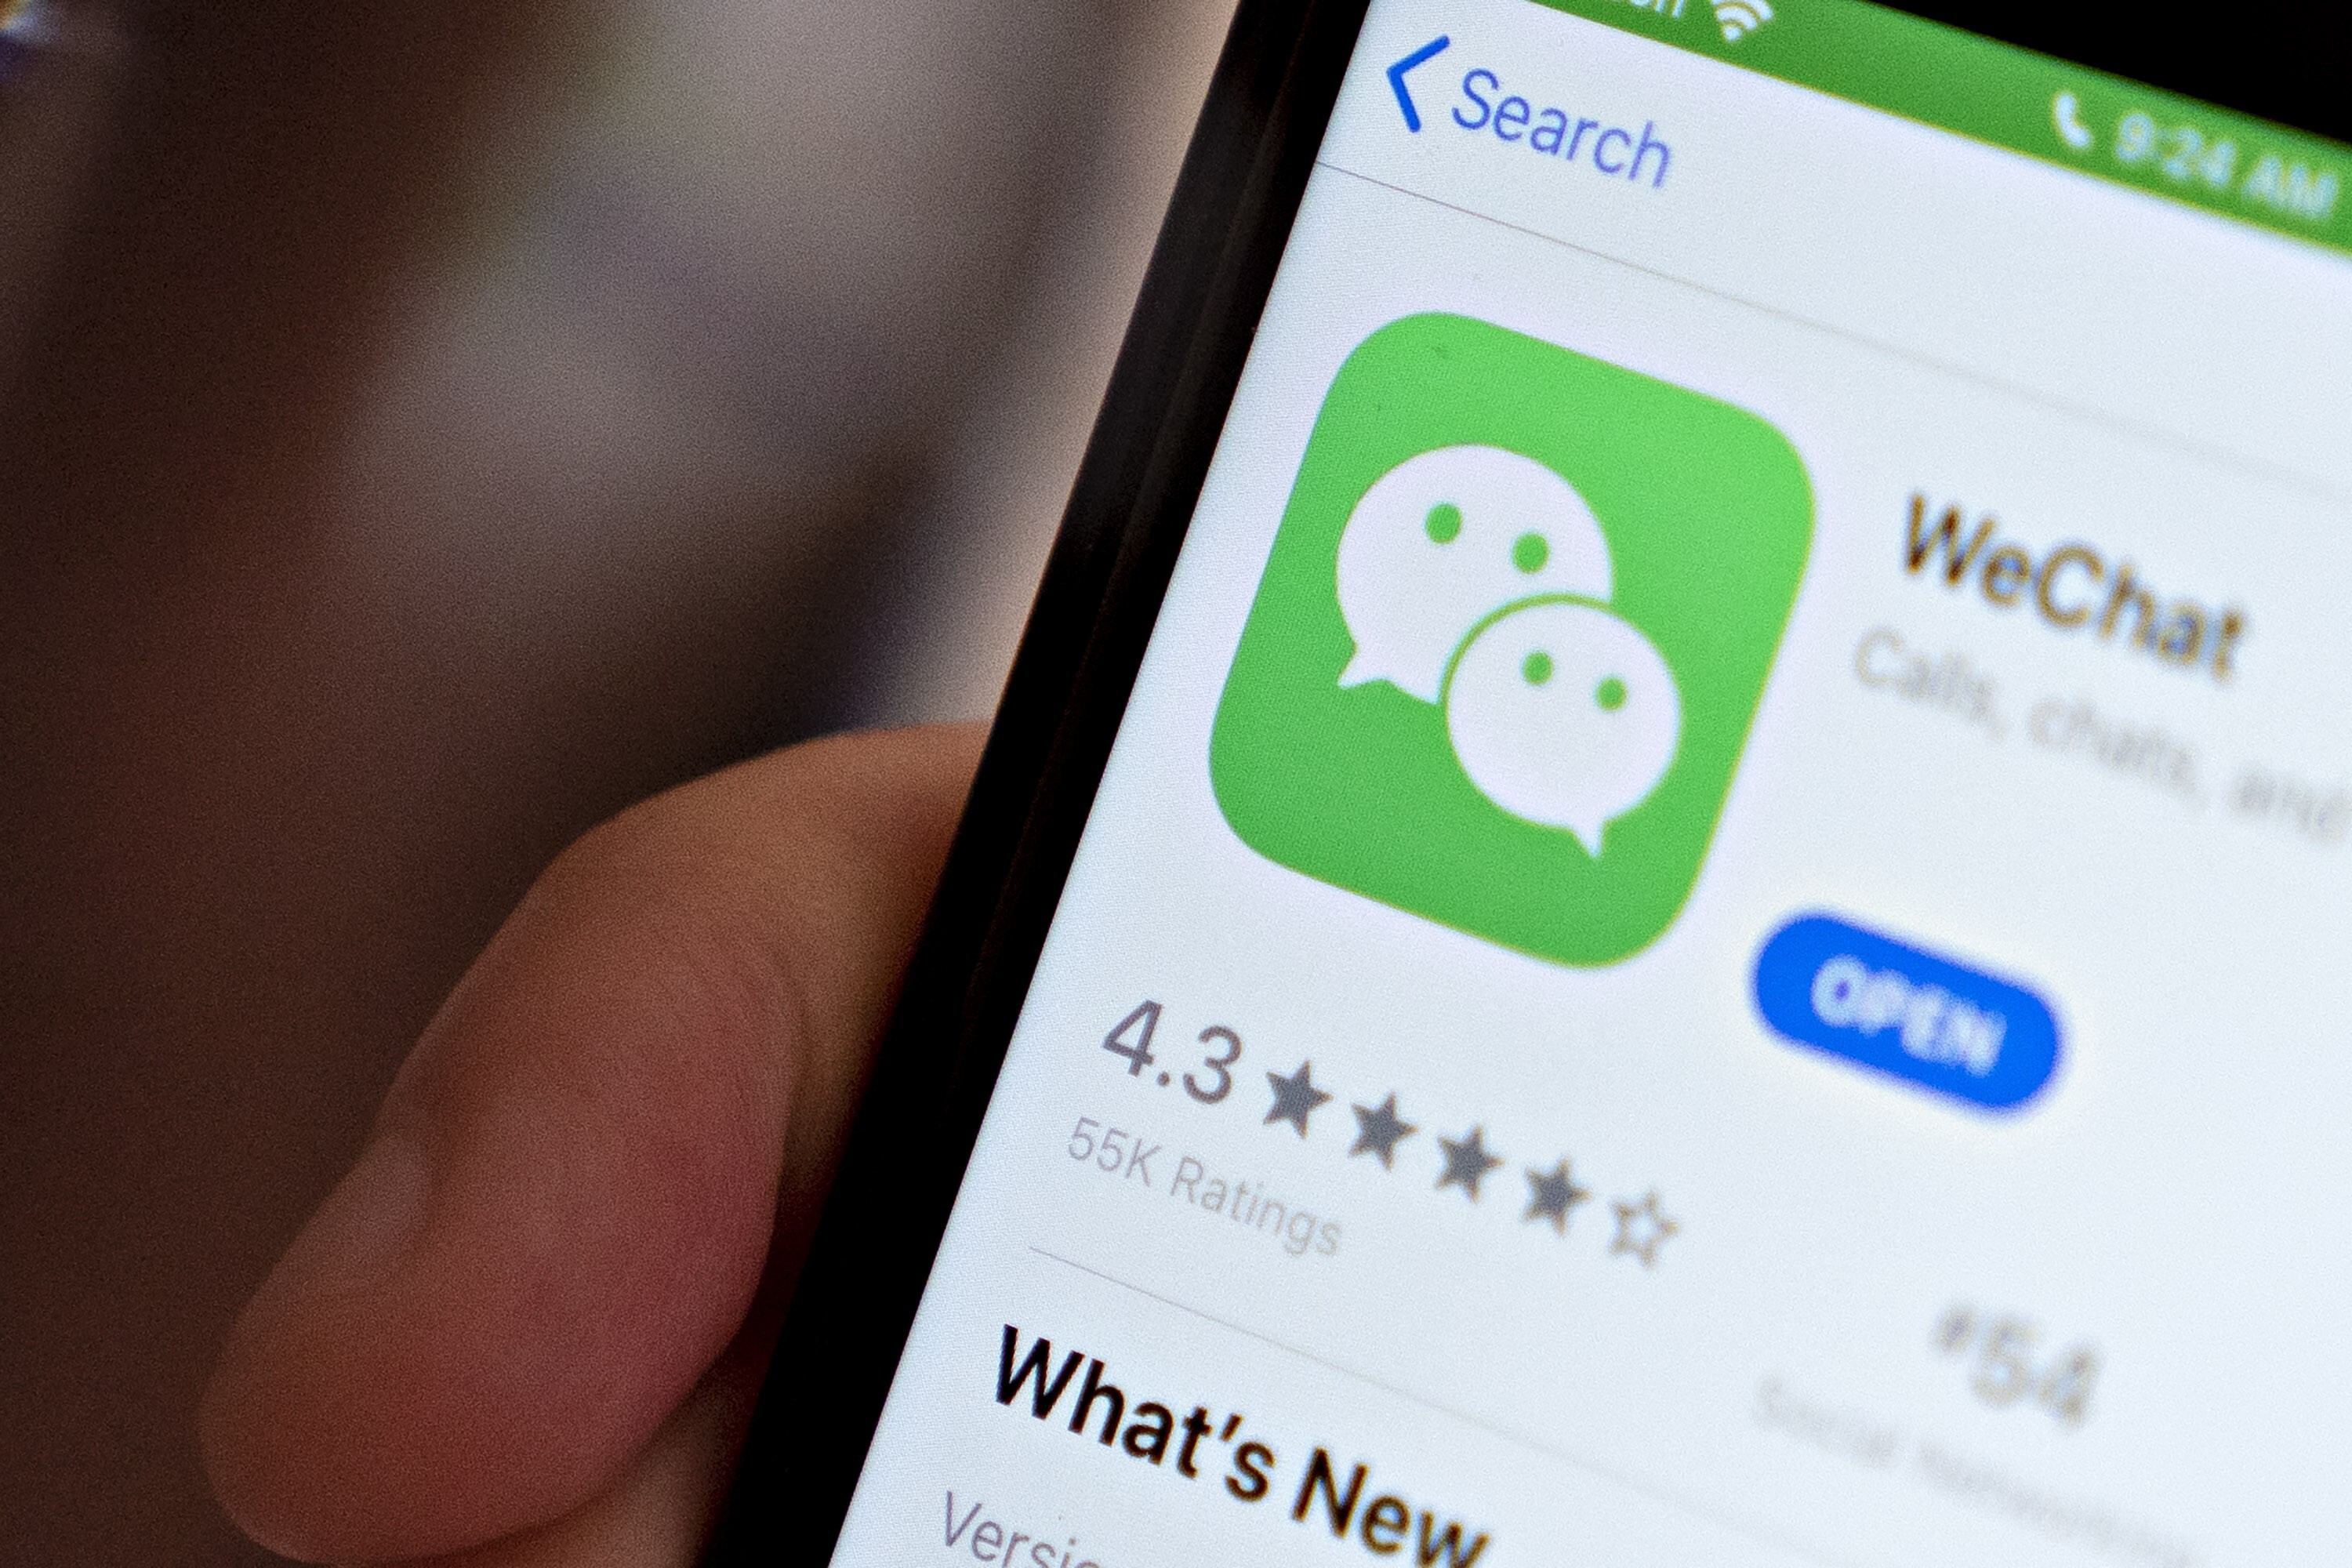 WeChat, which is owned by Tencent Holdings, has been threatened with a ban in the US. Photo: Bloomberg